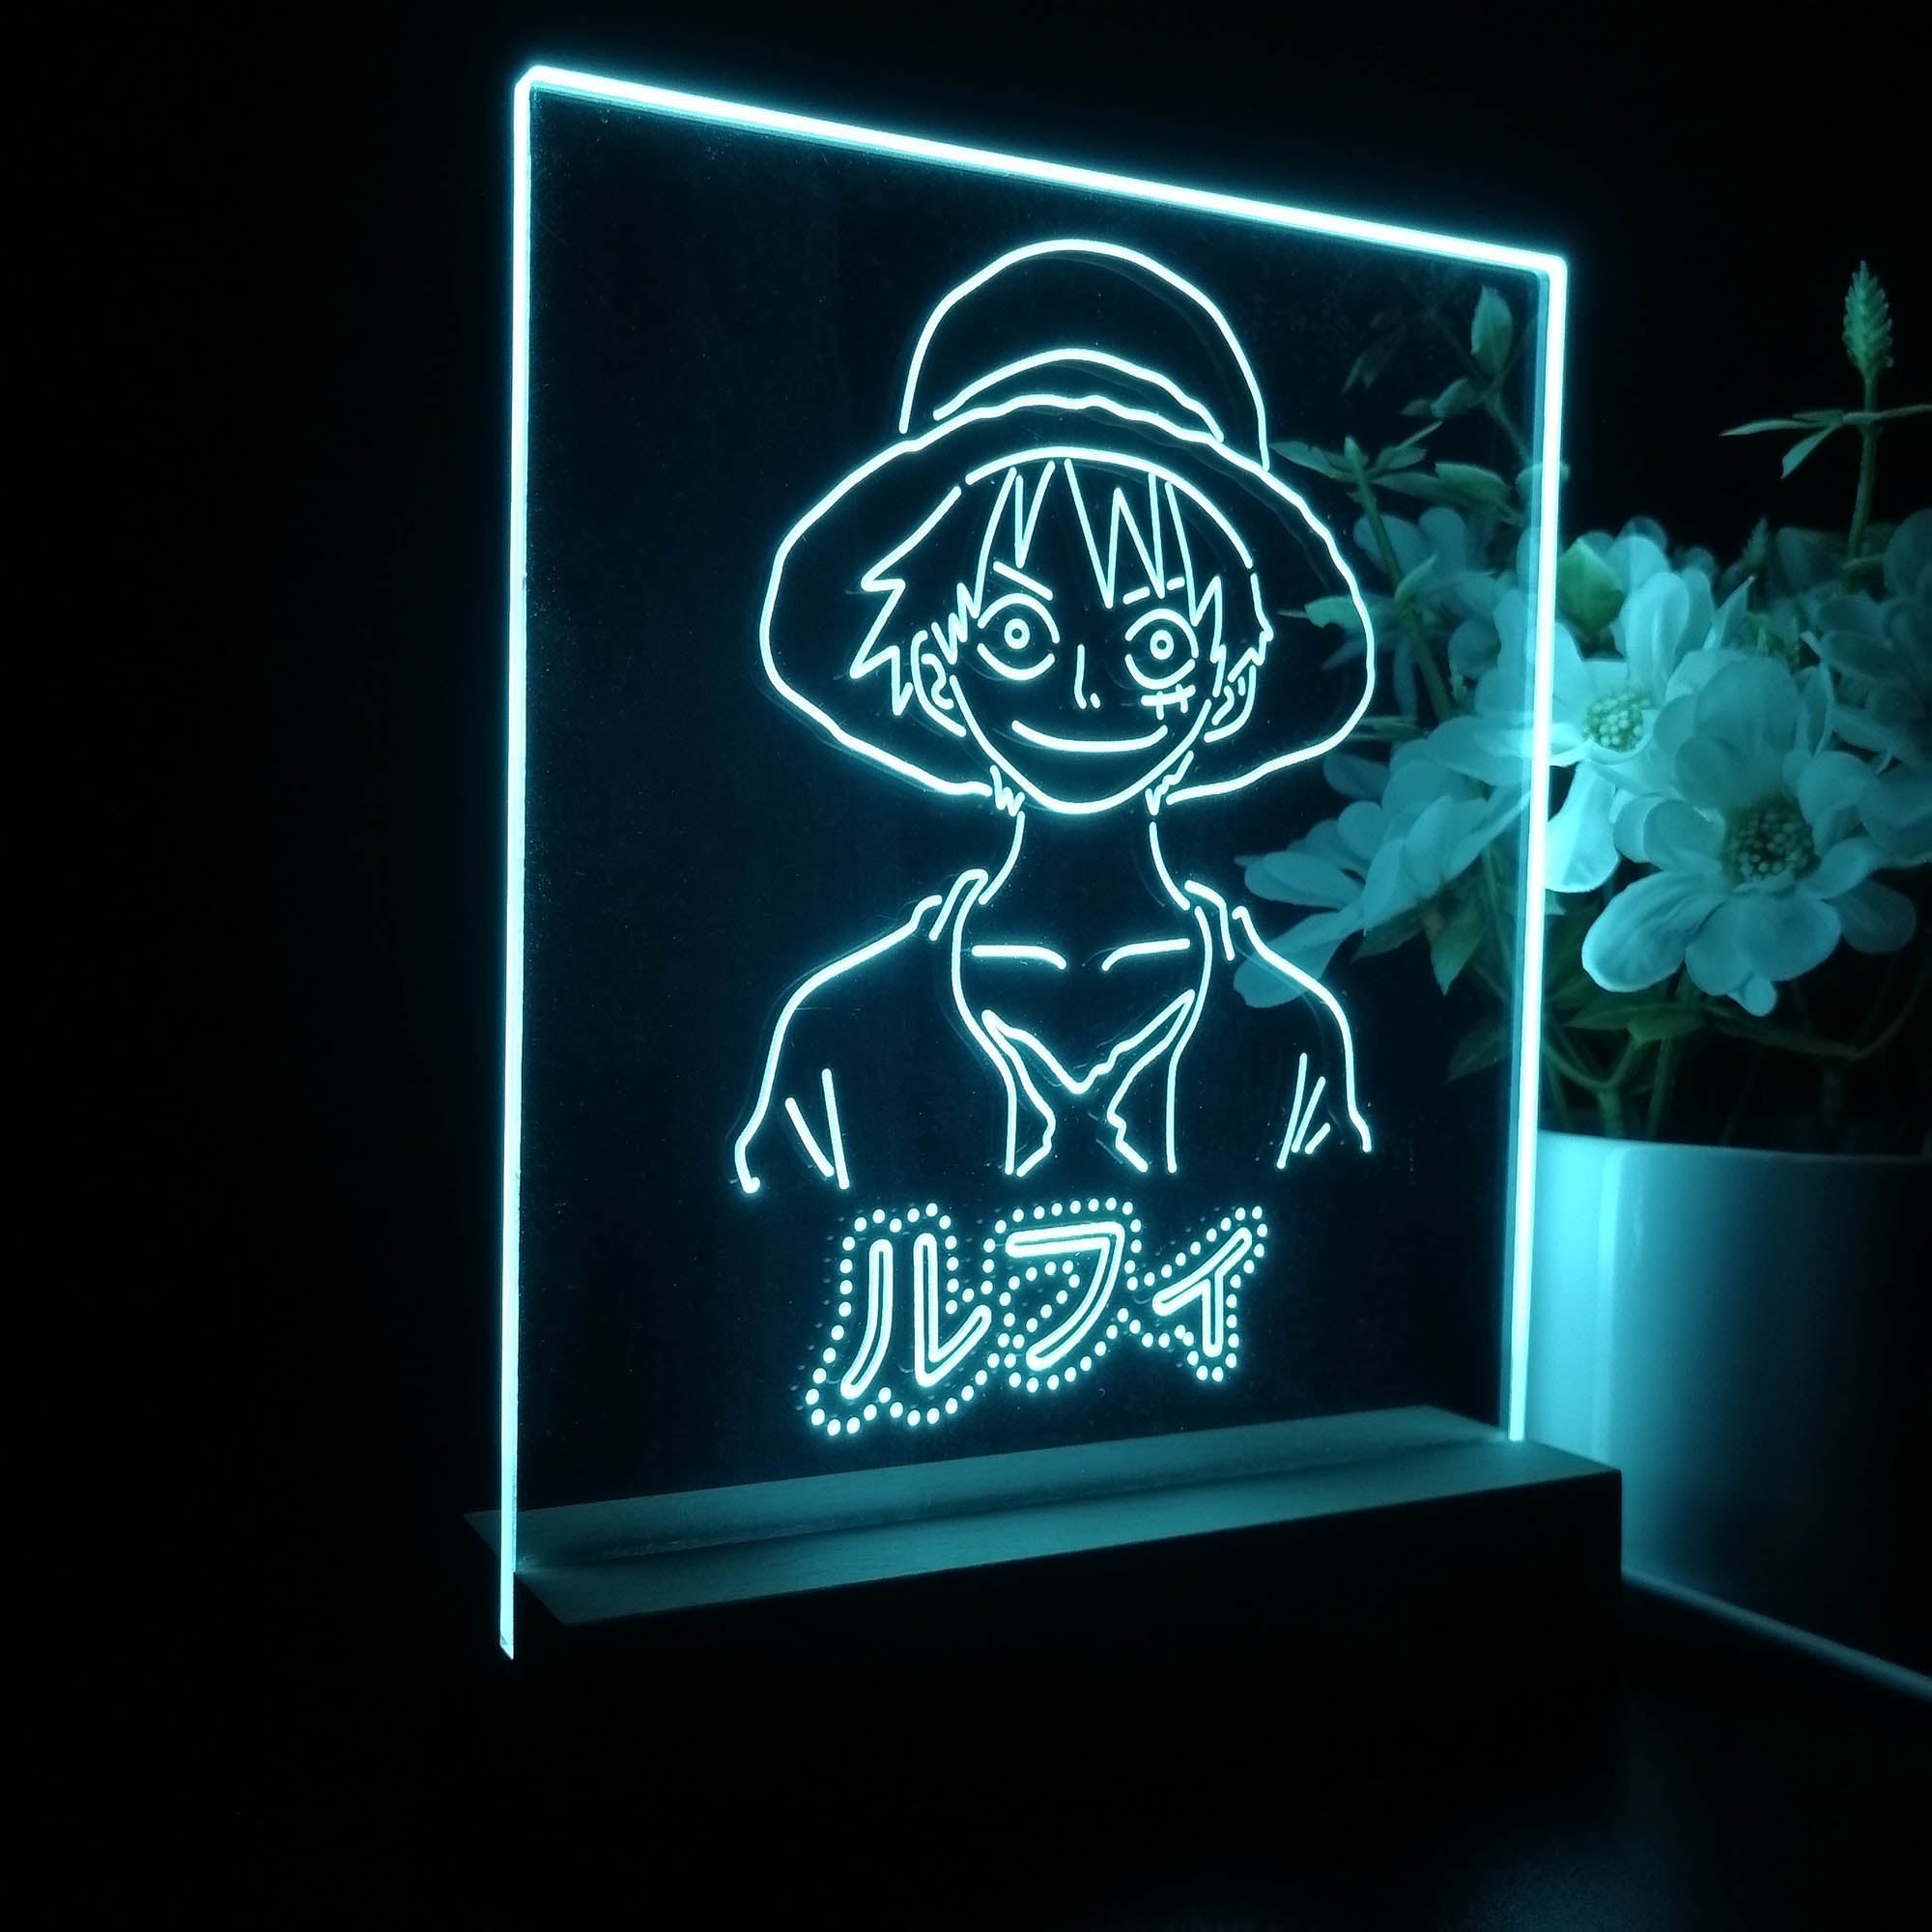 One Piece Game Room LED Sign Lamp Display